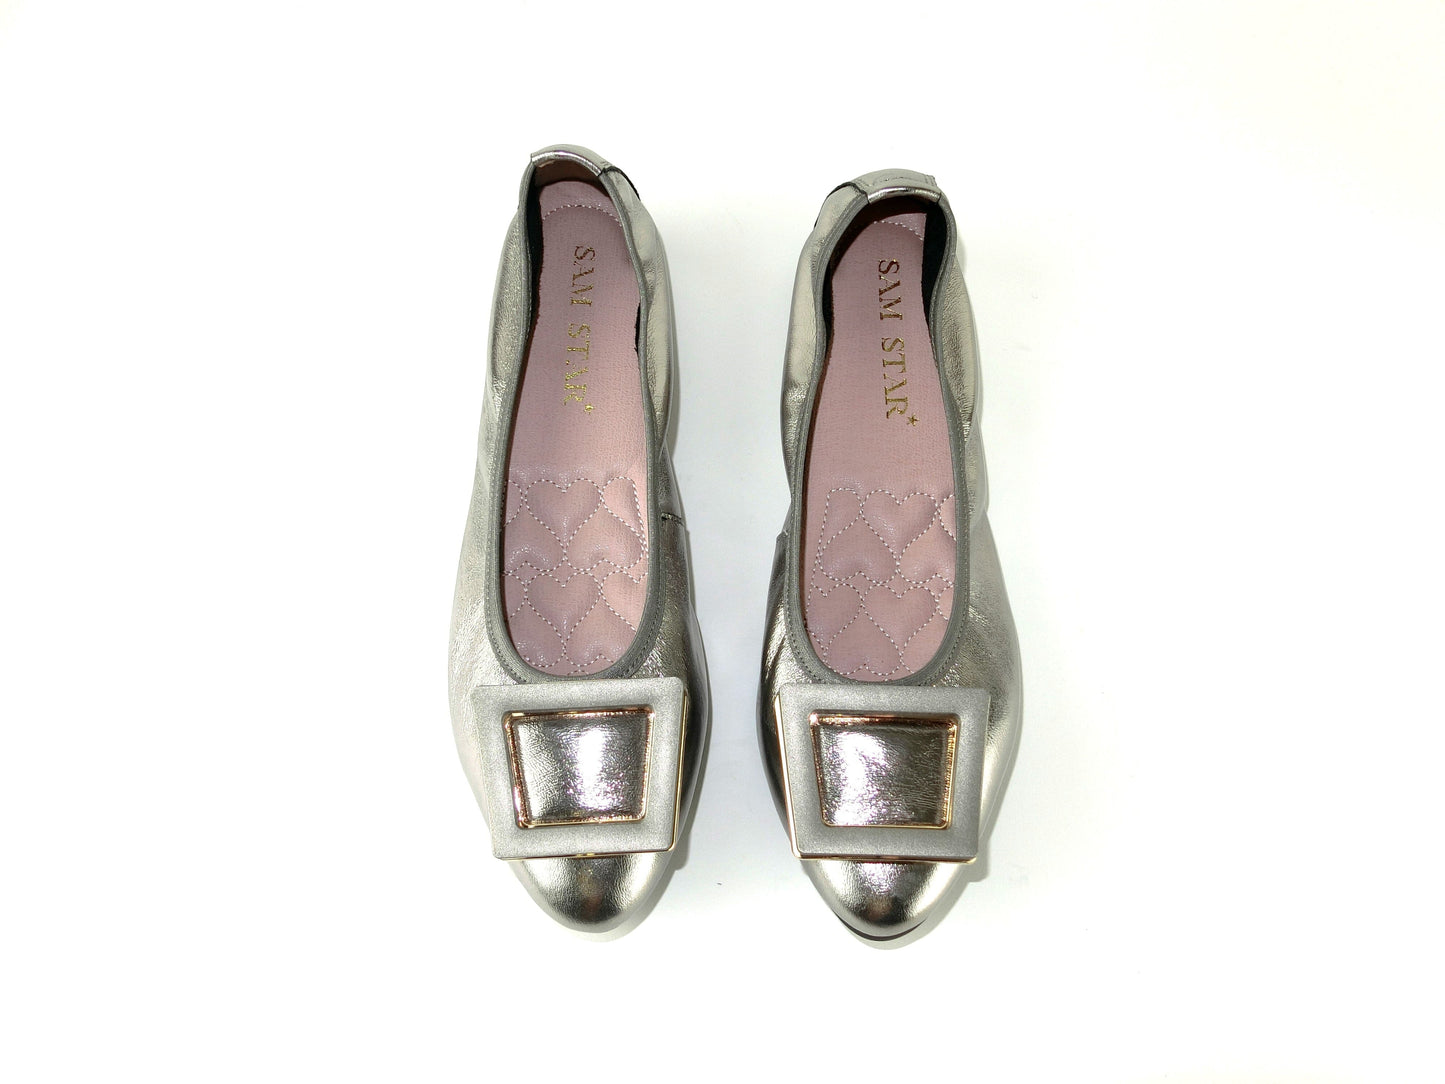 12W01 Leather Pointy buckle pumps with extra cushions (New) Pumps Sam Star Shoes Pewter 36 (3) 